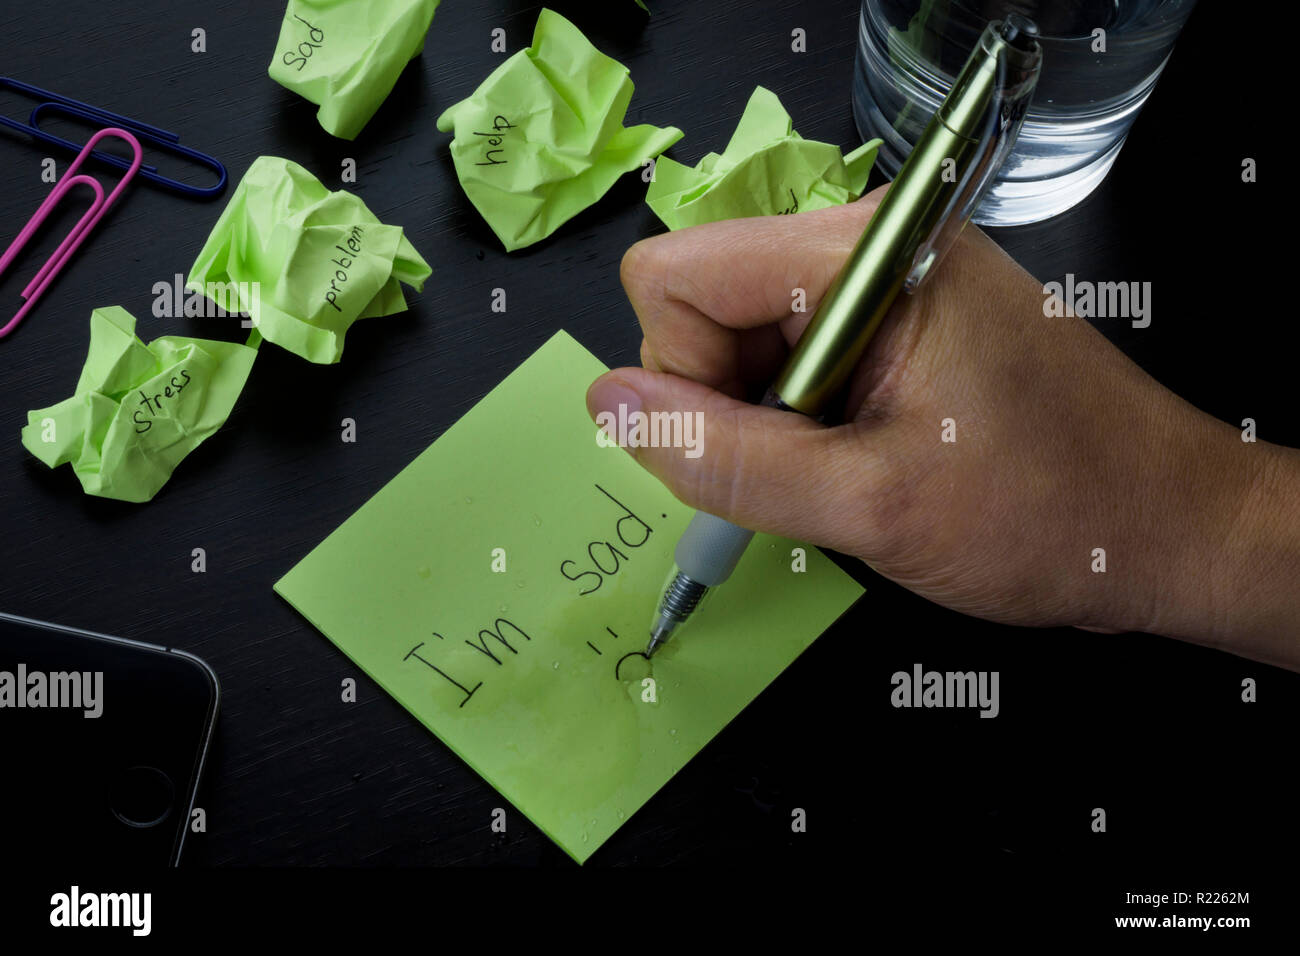 A hand writing on a green sticky note the phrase 'I'm sad.' A photo about depression, sadness and loneliness. Crumpled green sticky notes scattered. Stock Photo